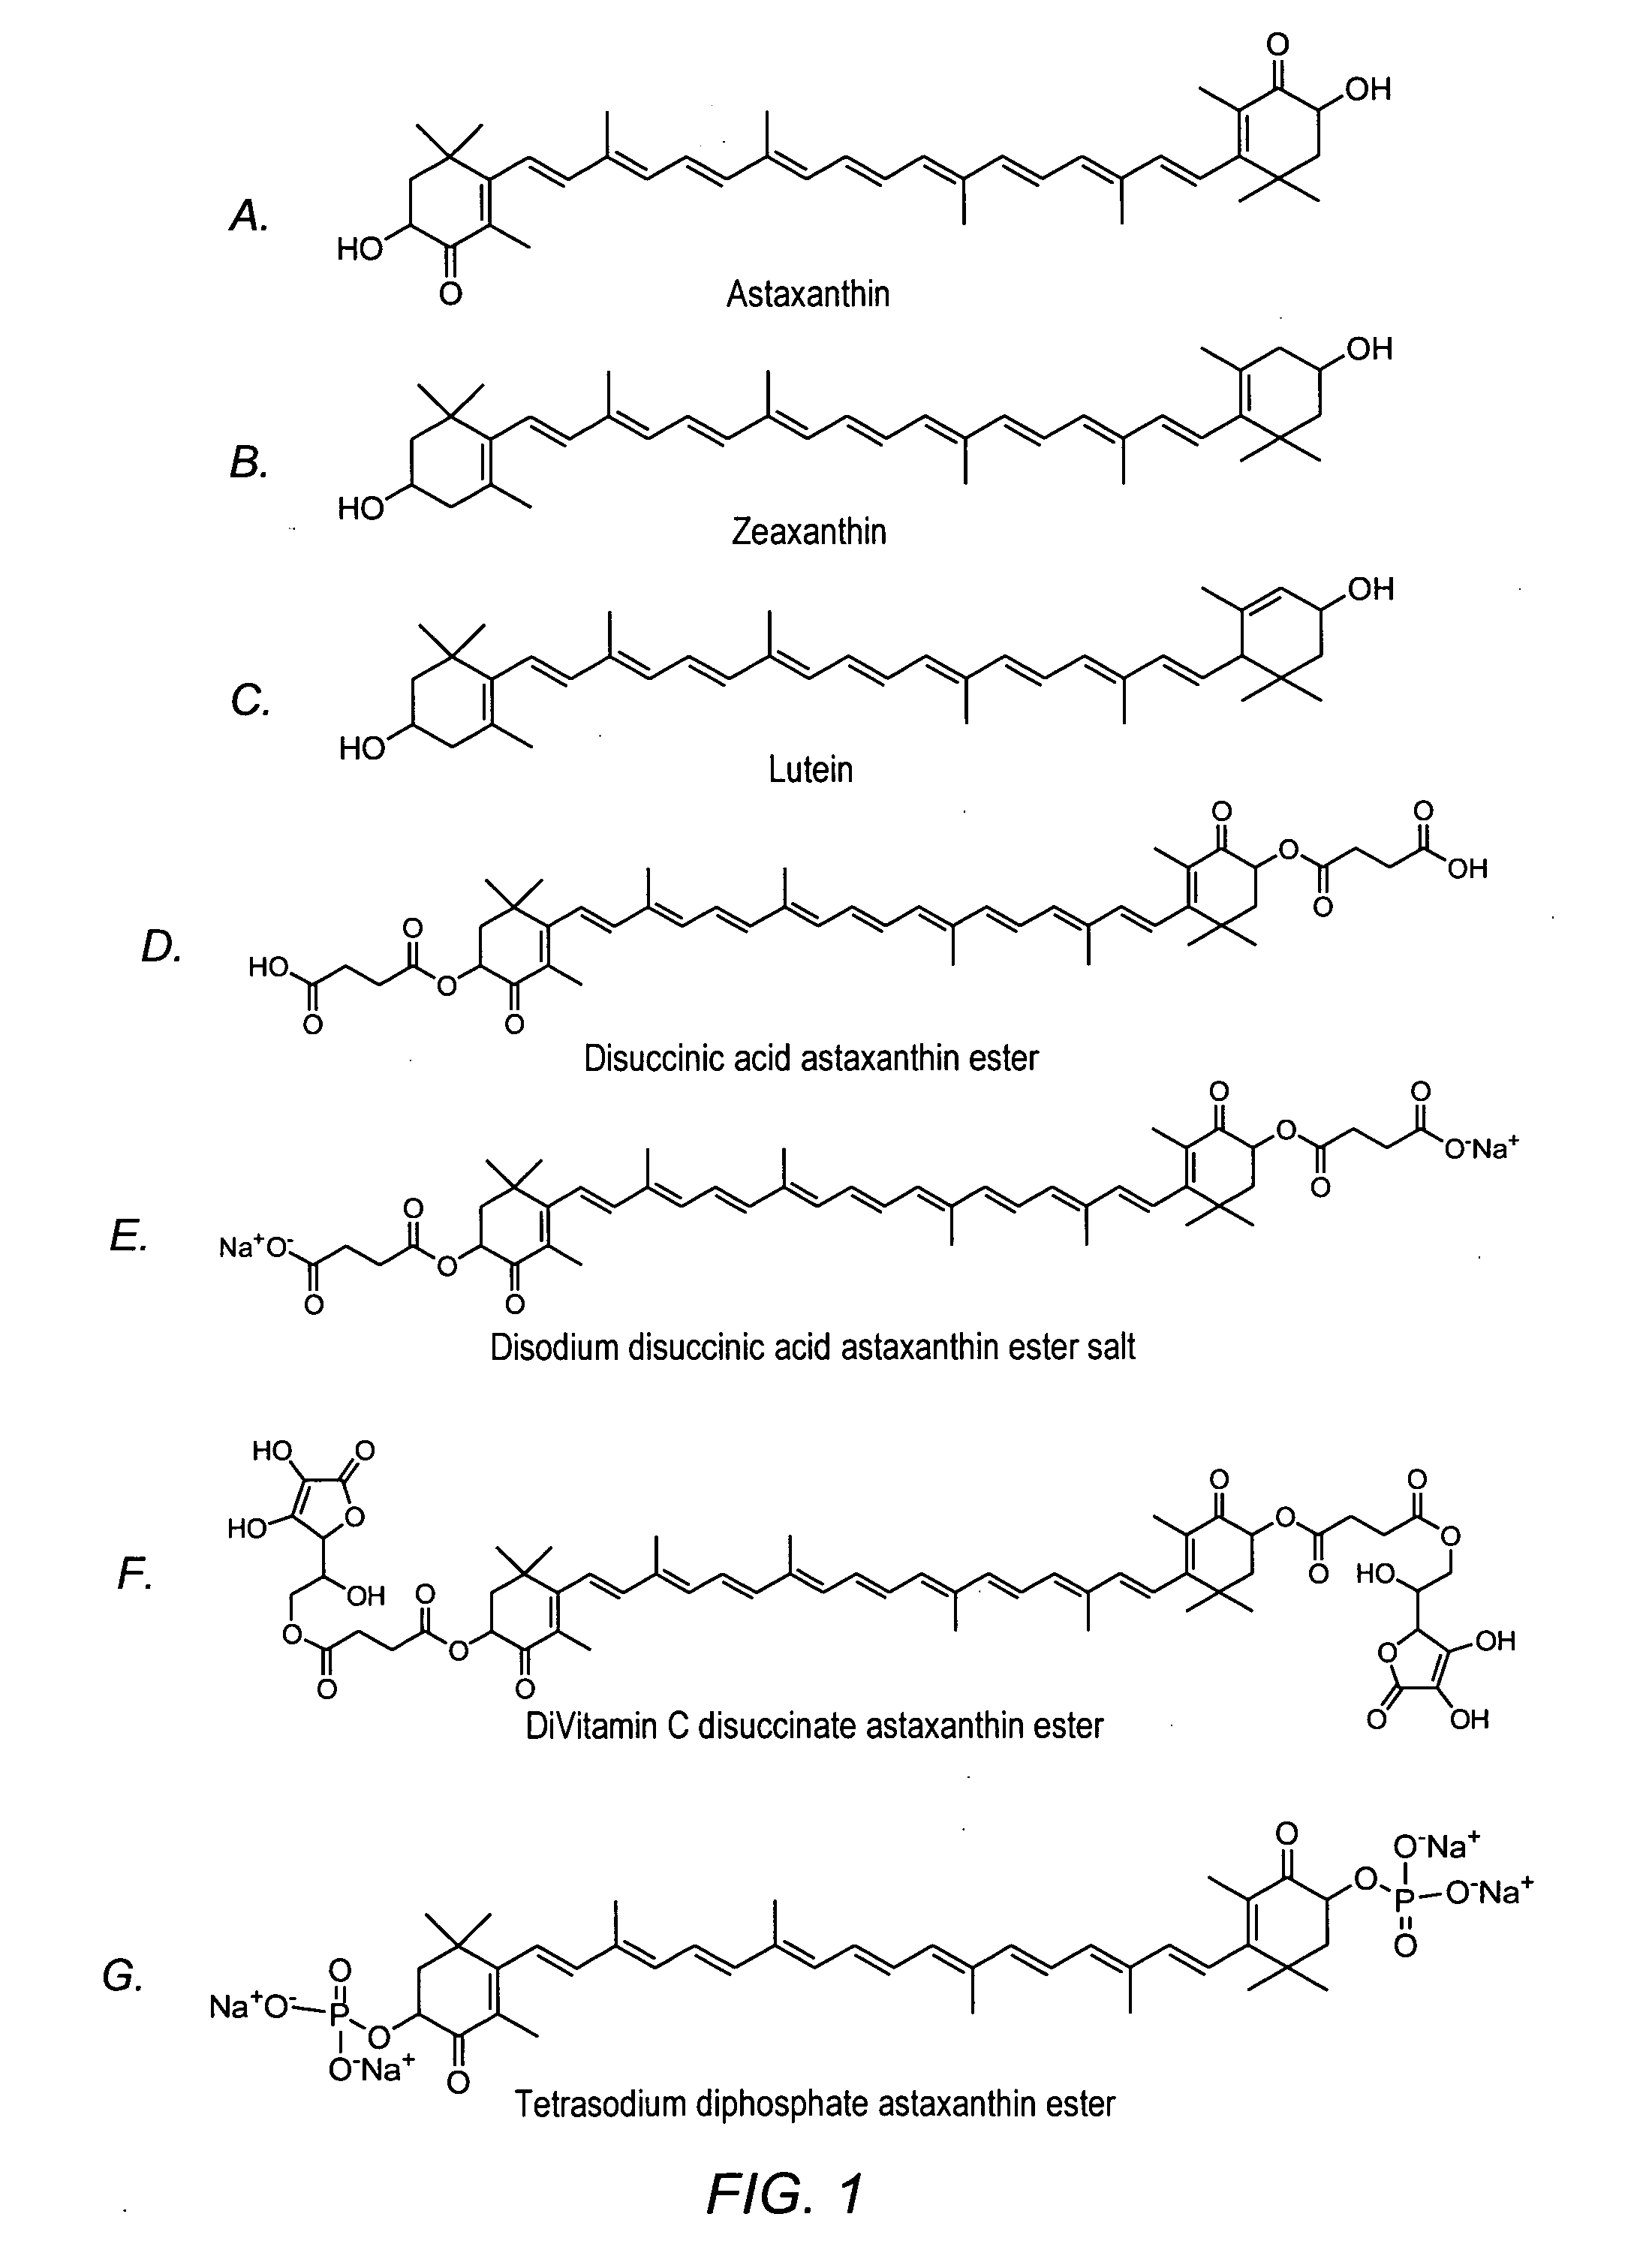 Water-dispersible carotenoids, including analogs and derivatives